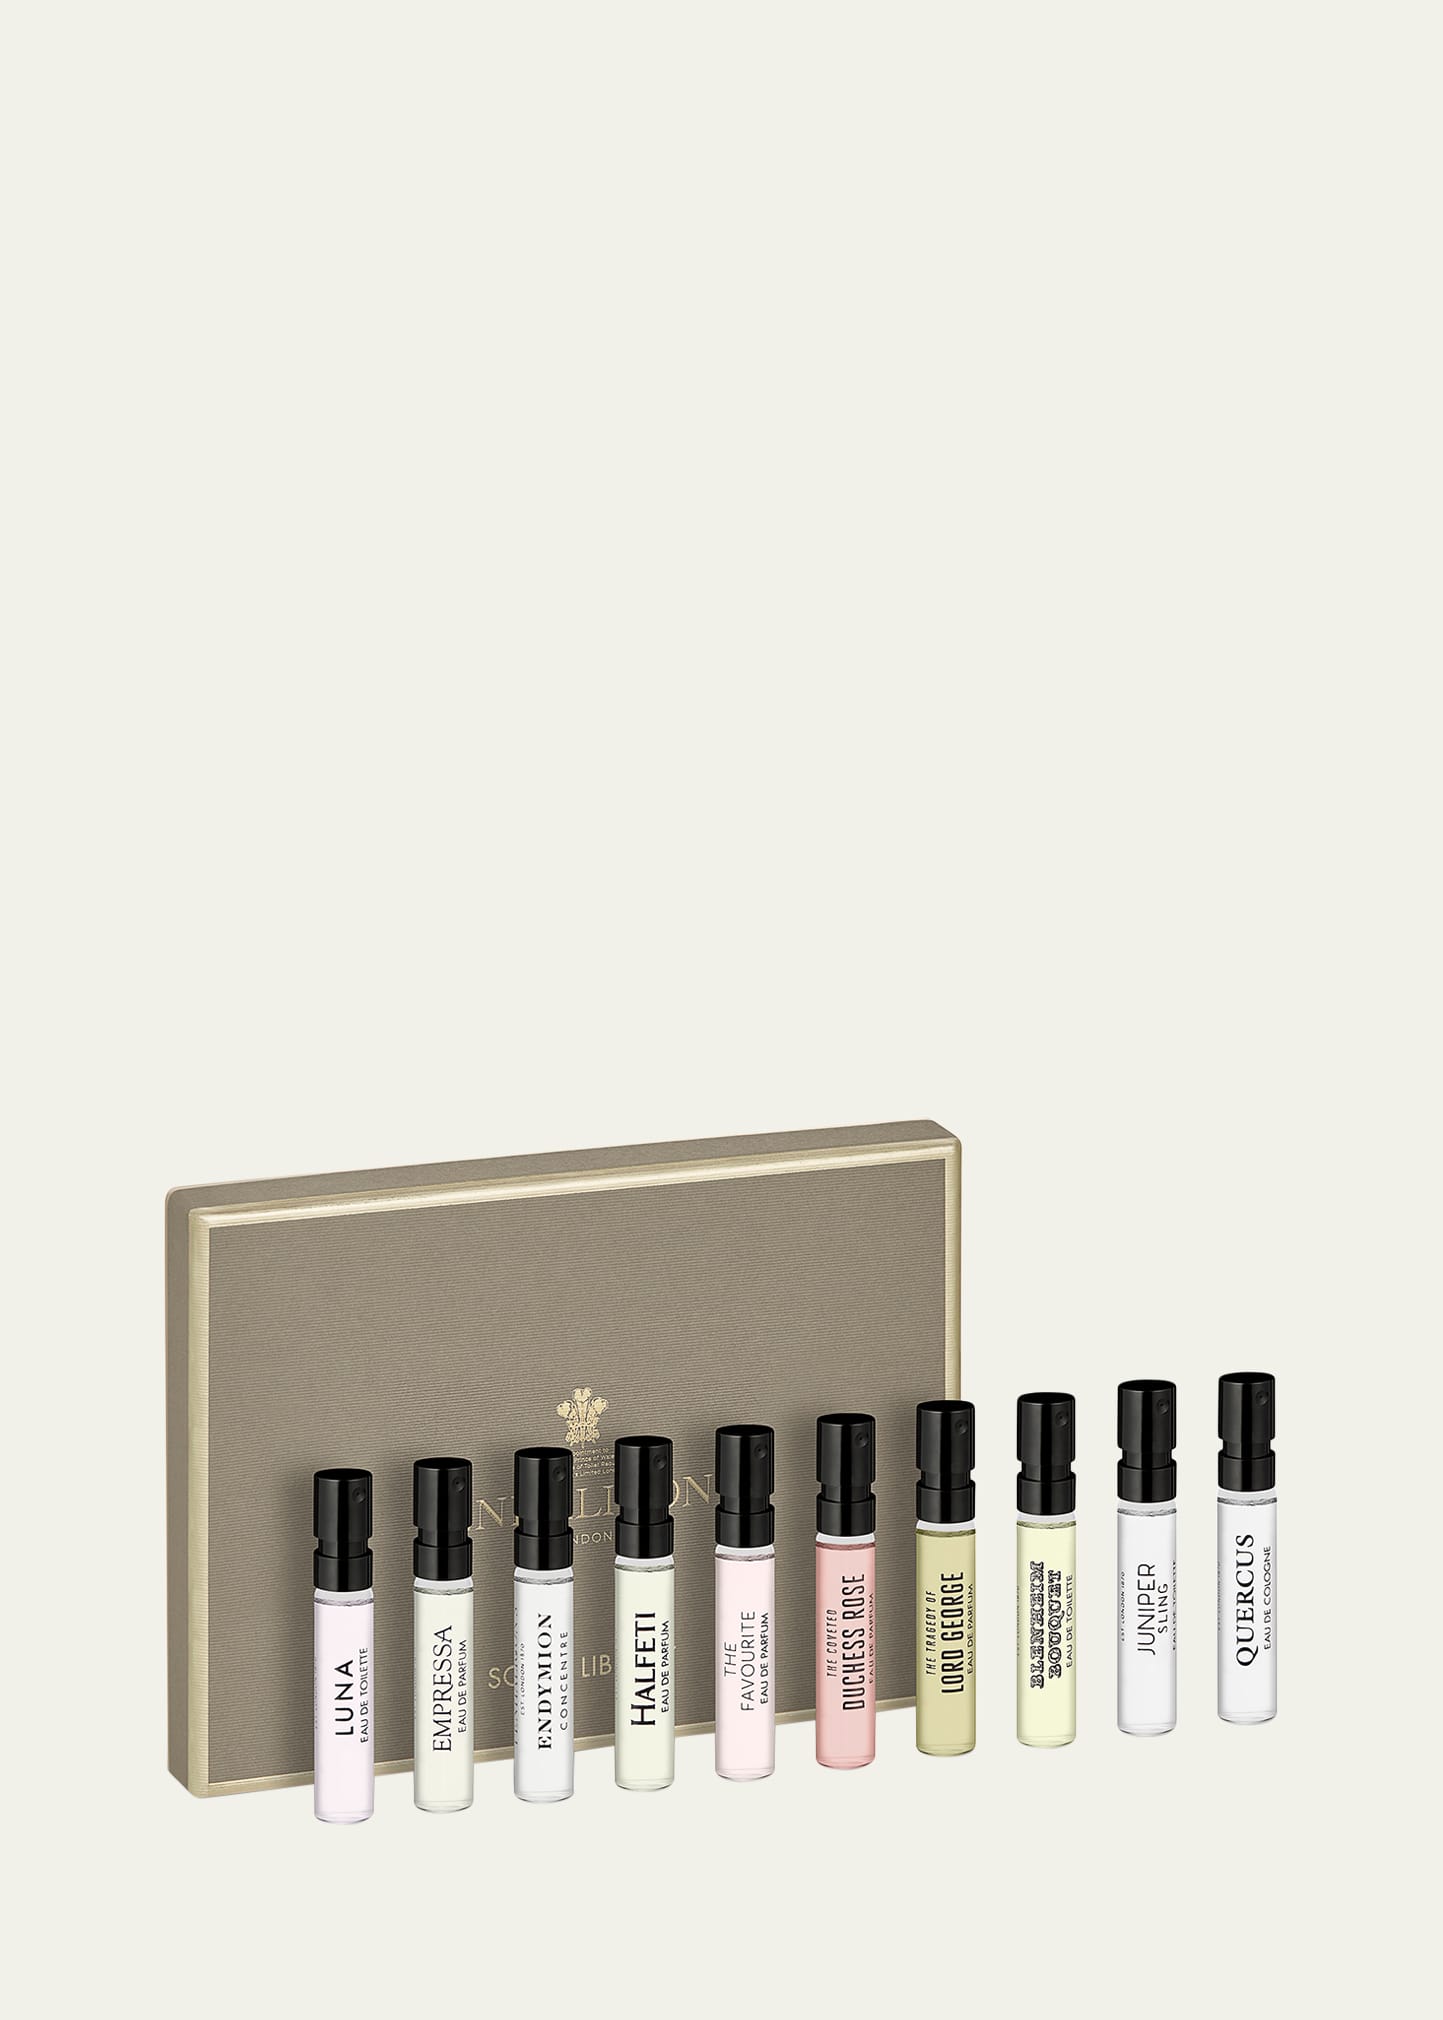 Best-Sellers Scent Library, 10 x 2 mL